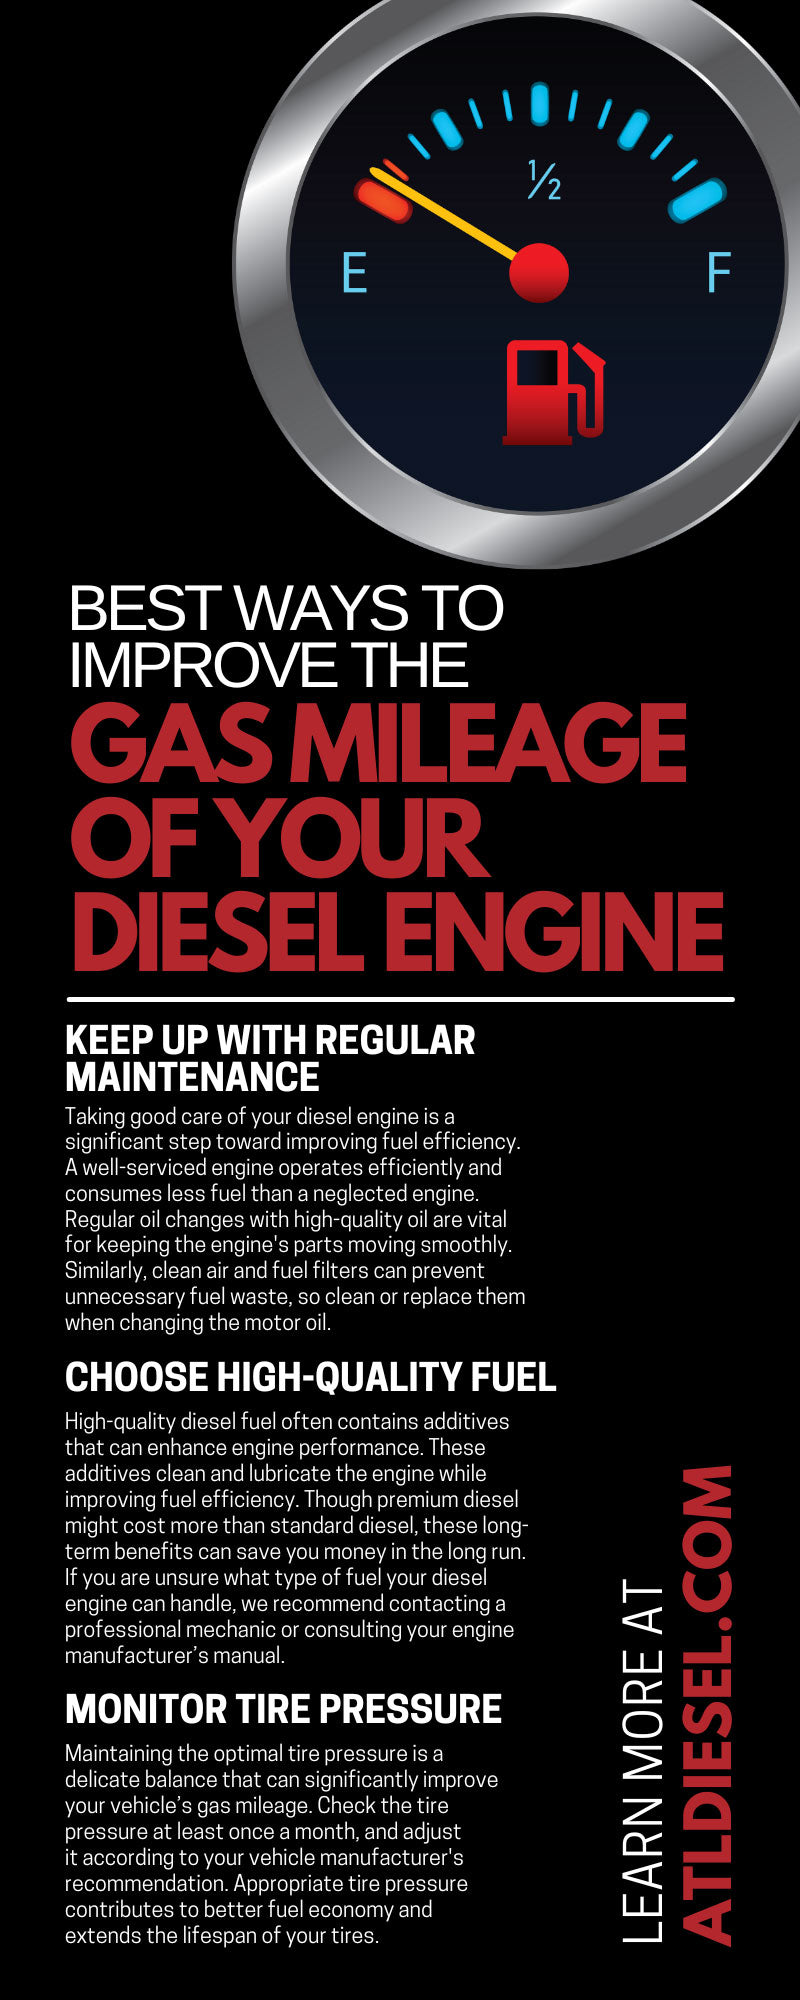 Best Ways To Improve the Gas Mileage of Your Diesel Engine